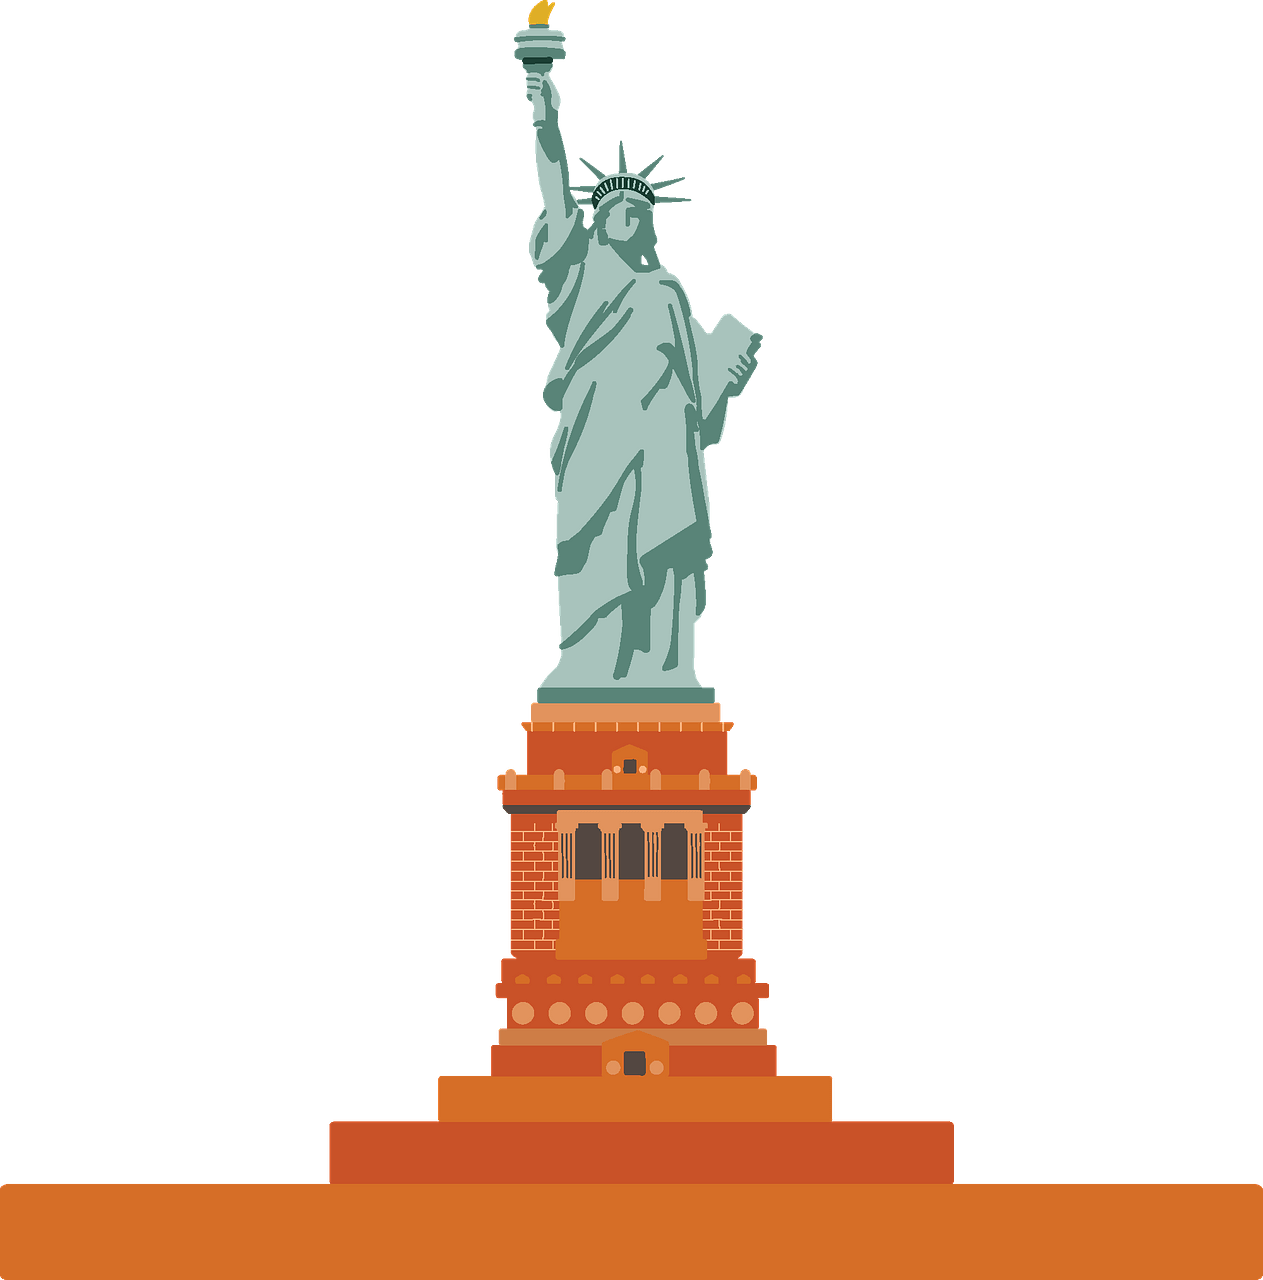 statue-of-liberty-clipart #3171300 (License: Personal Use) .